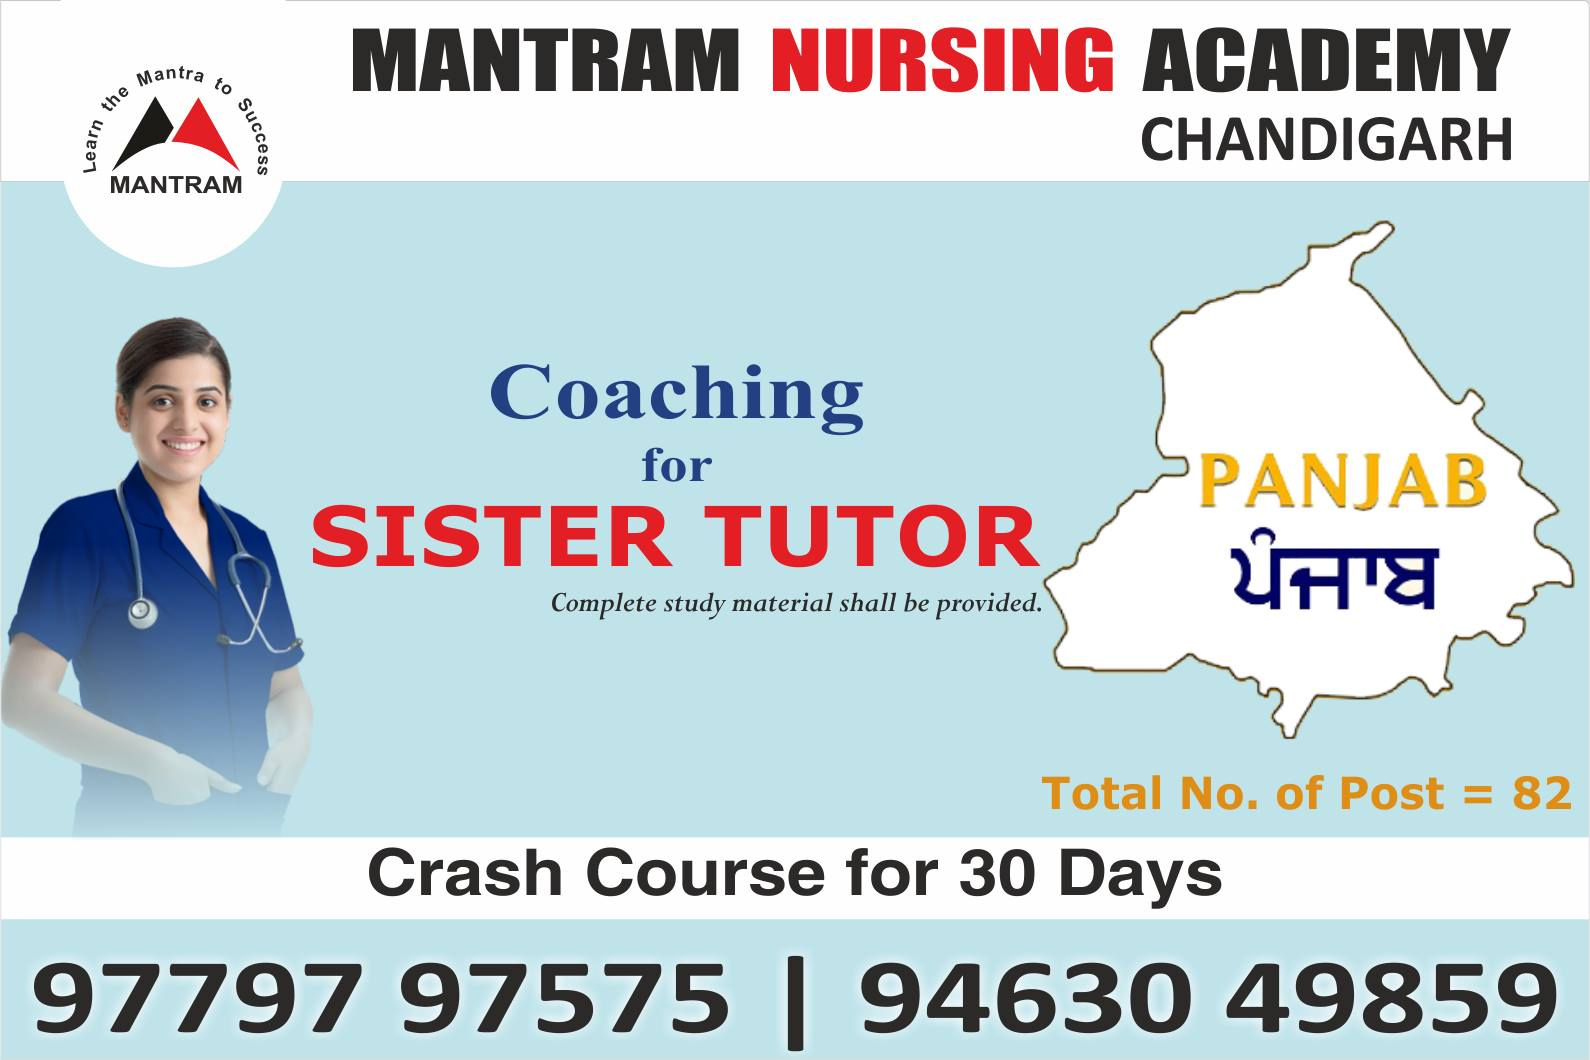 Special Coaching Classes by Mantram Nursing Academy for Sister Tutor Punjab 2019.